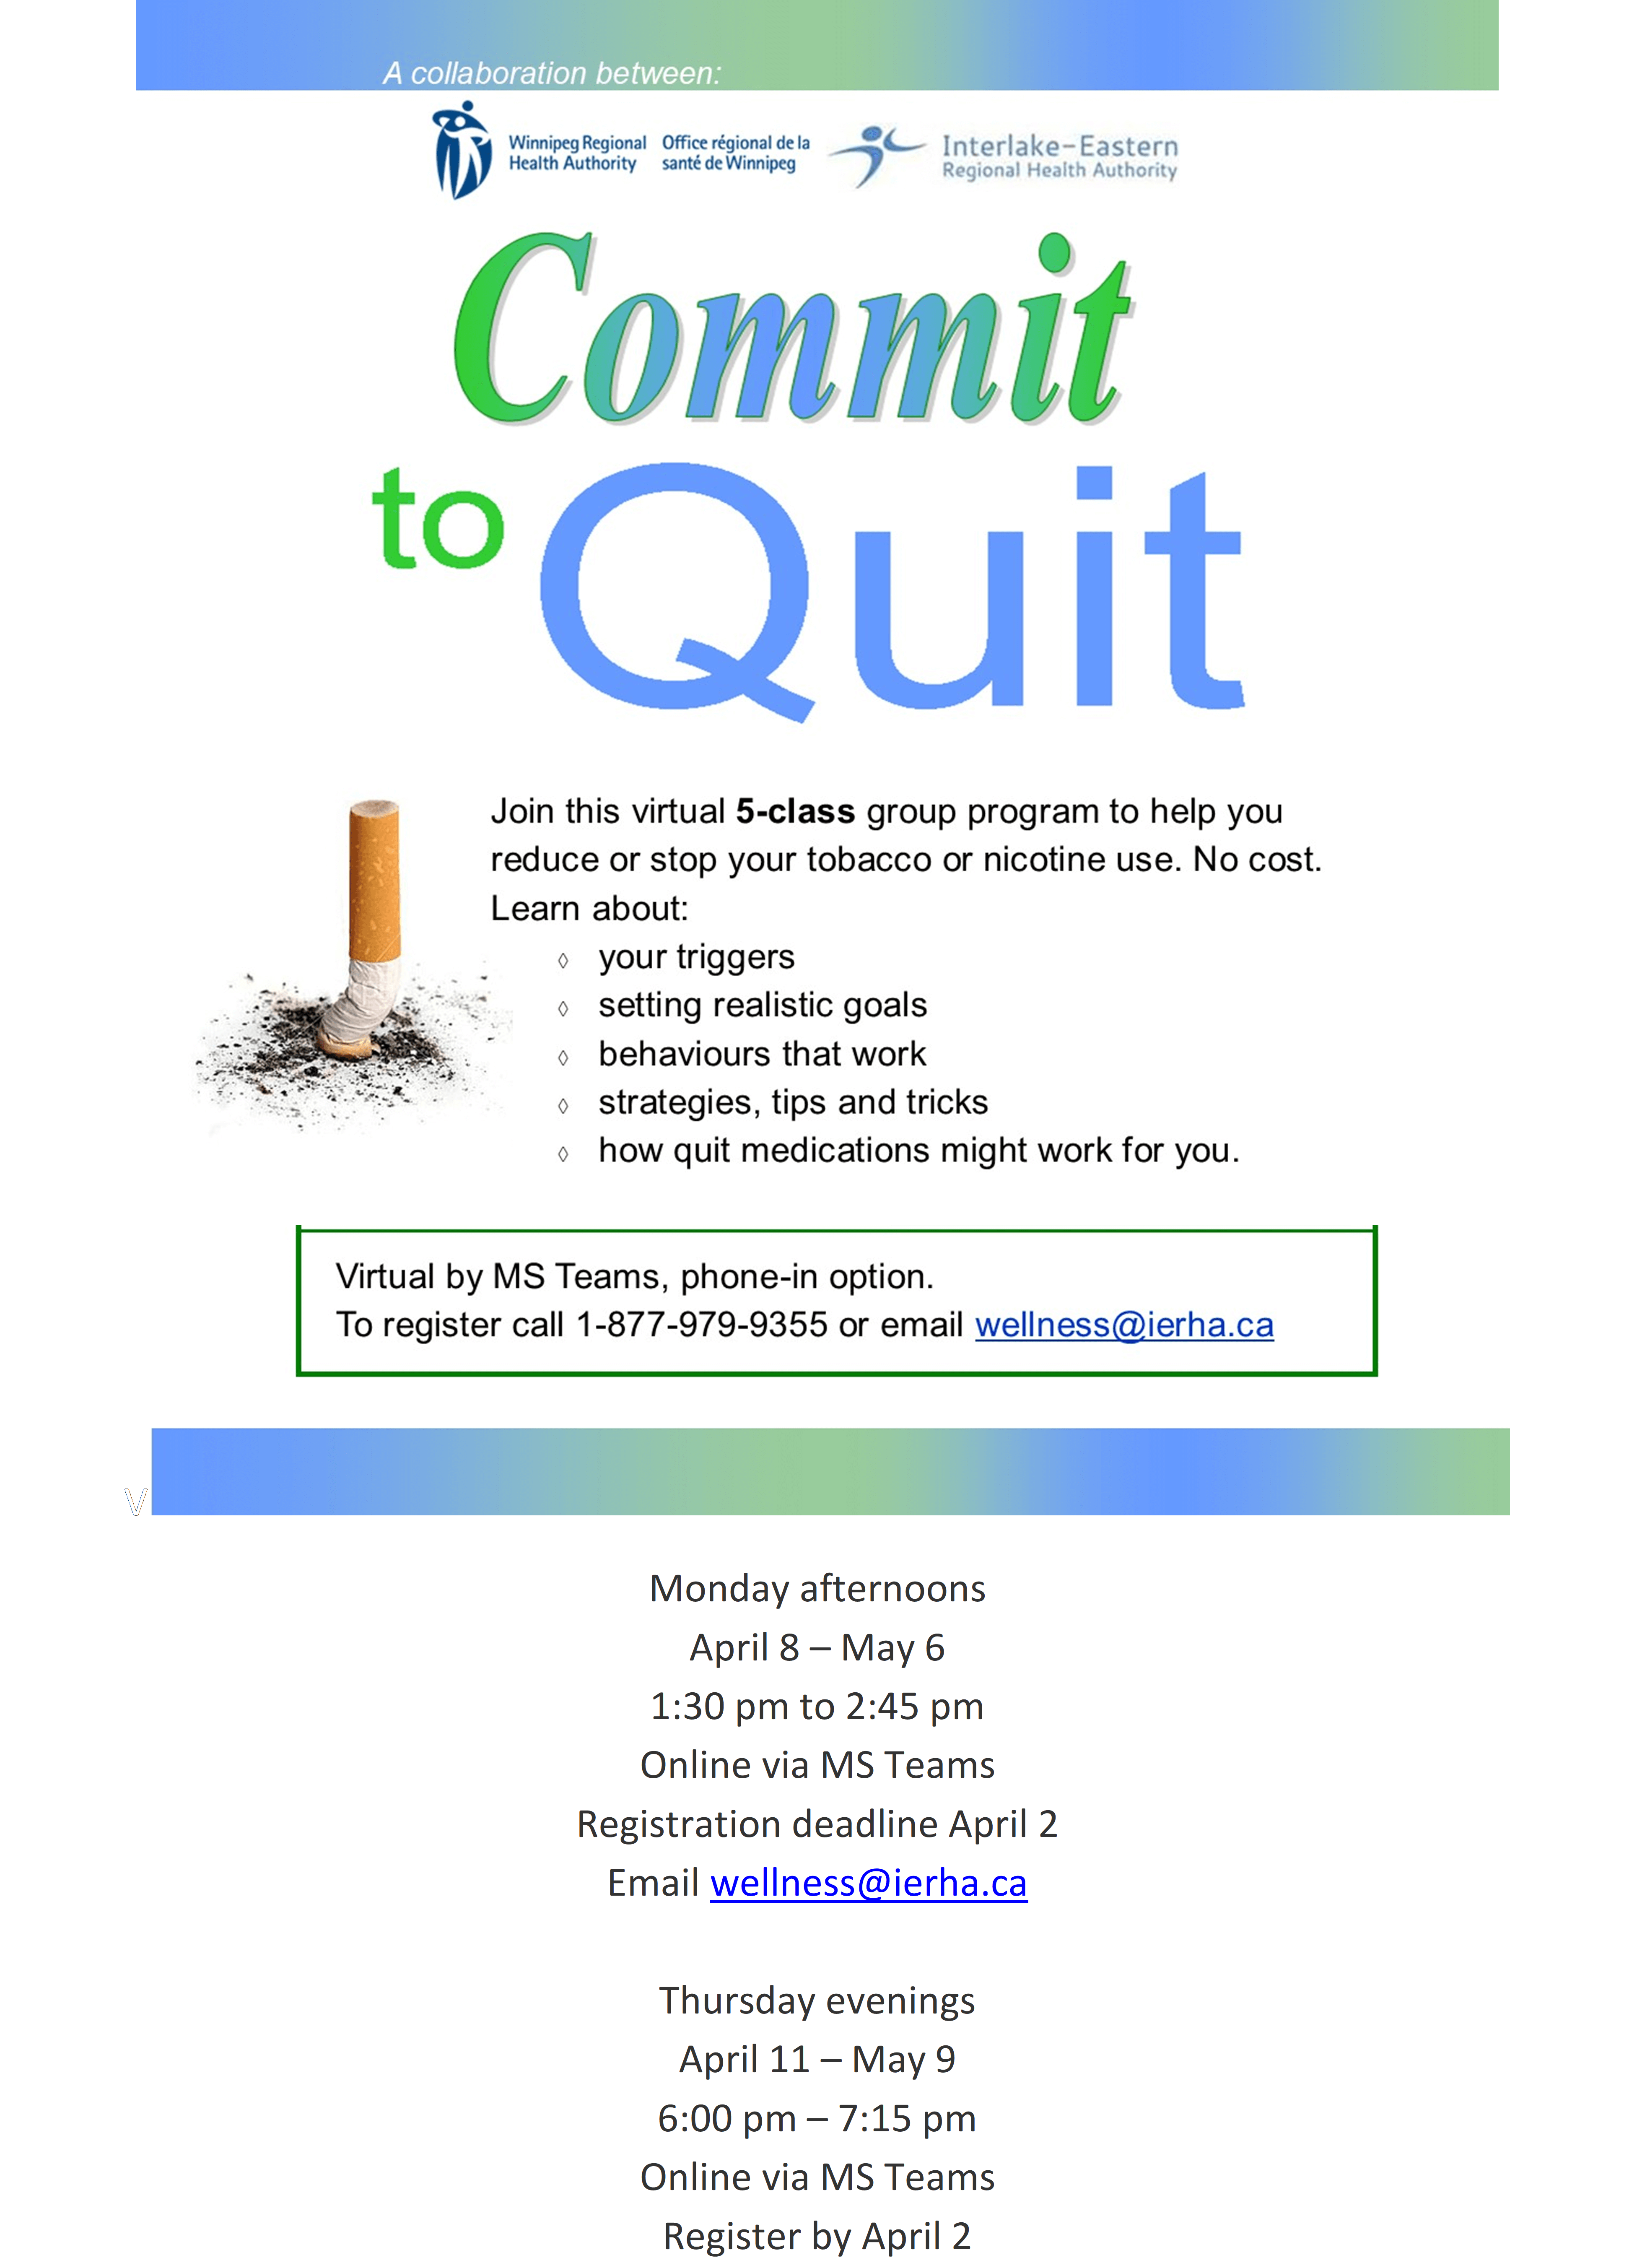 Commit to Quit. Join this FREE 5 class virtual program to help you reduce or stop your tobacco or nicotine use.   Email wellness@ierha.ca